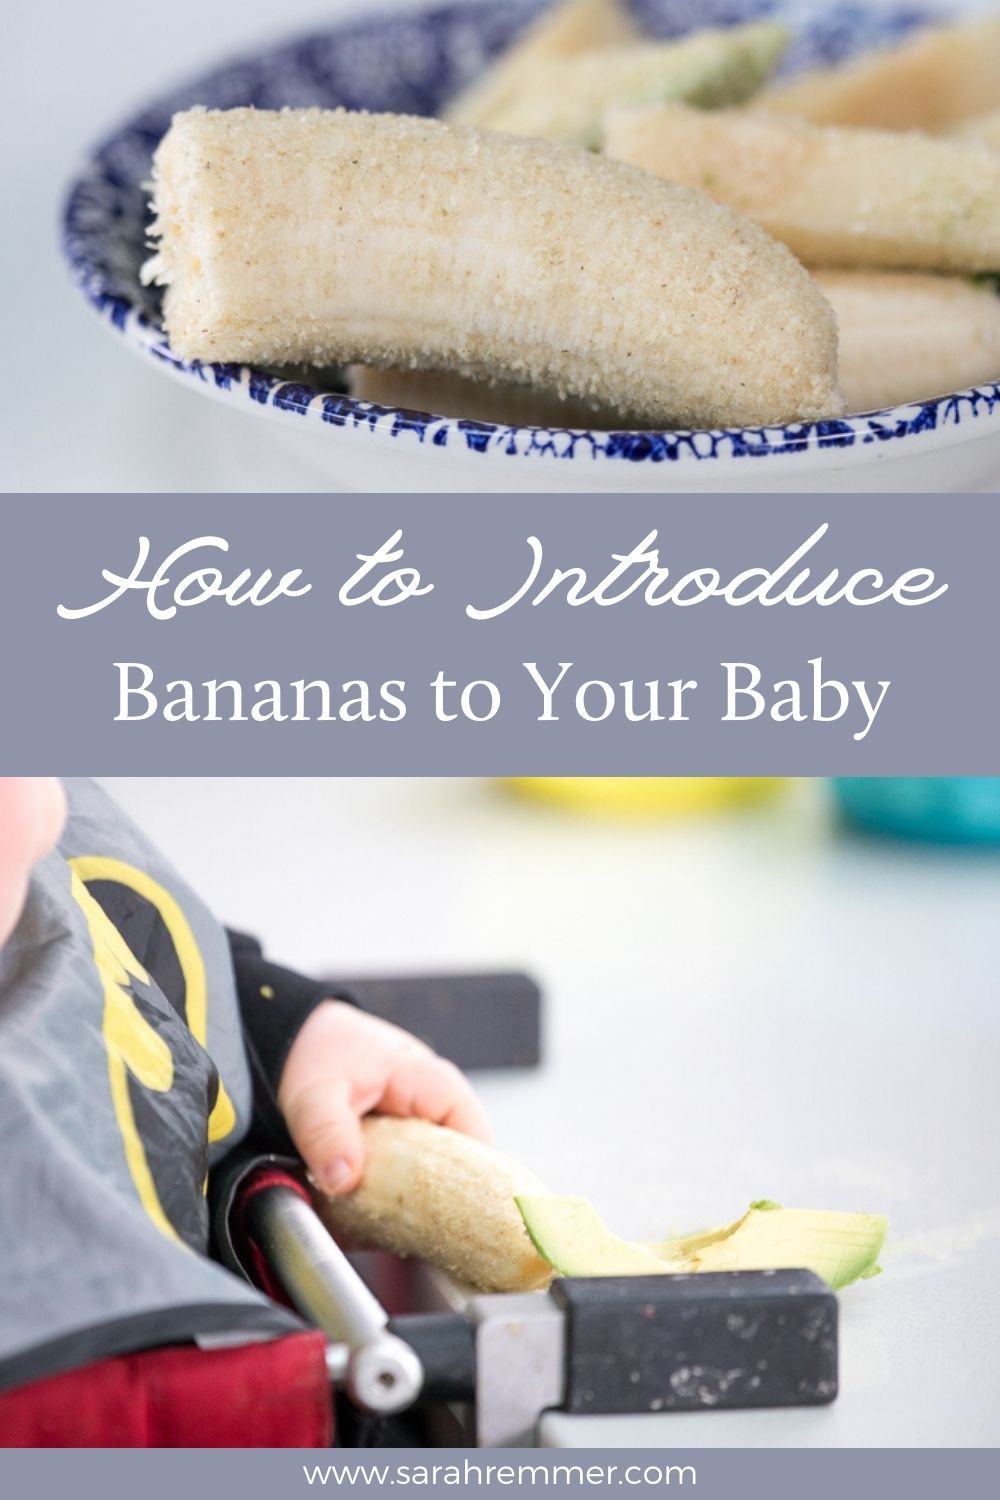 Here is everything you need to know about baby-led weaning with banana, from a pediatric registered dietitian. Whether you’re doing baby-led weaning, spoon-feeding, or a combination, this post will walk you through how to introduce bananas to your baby.